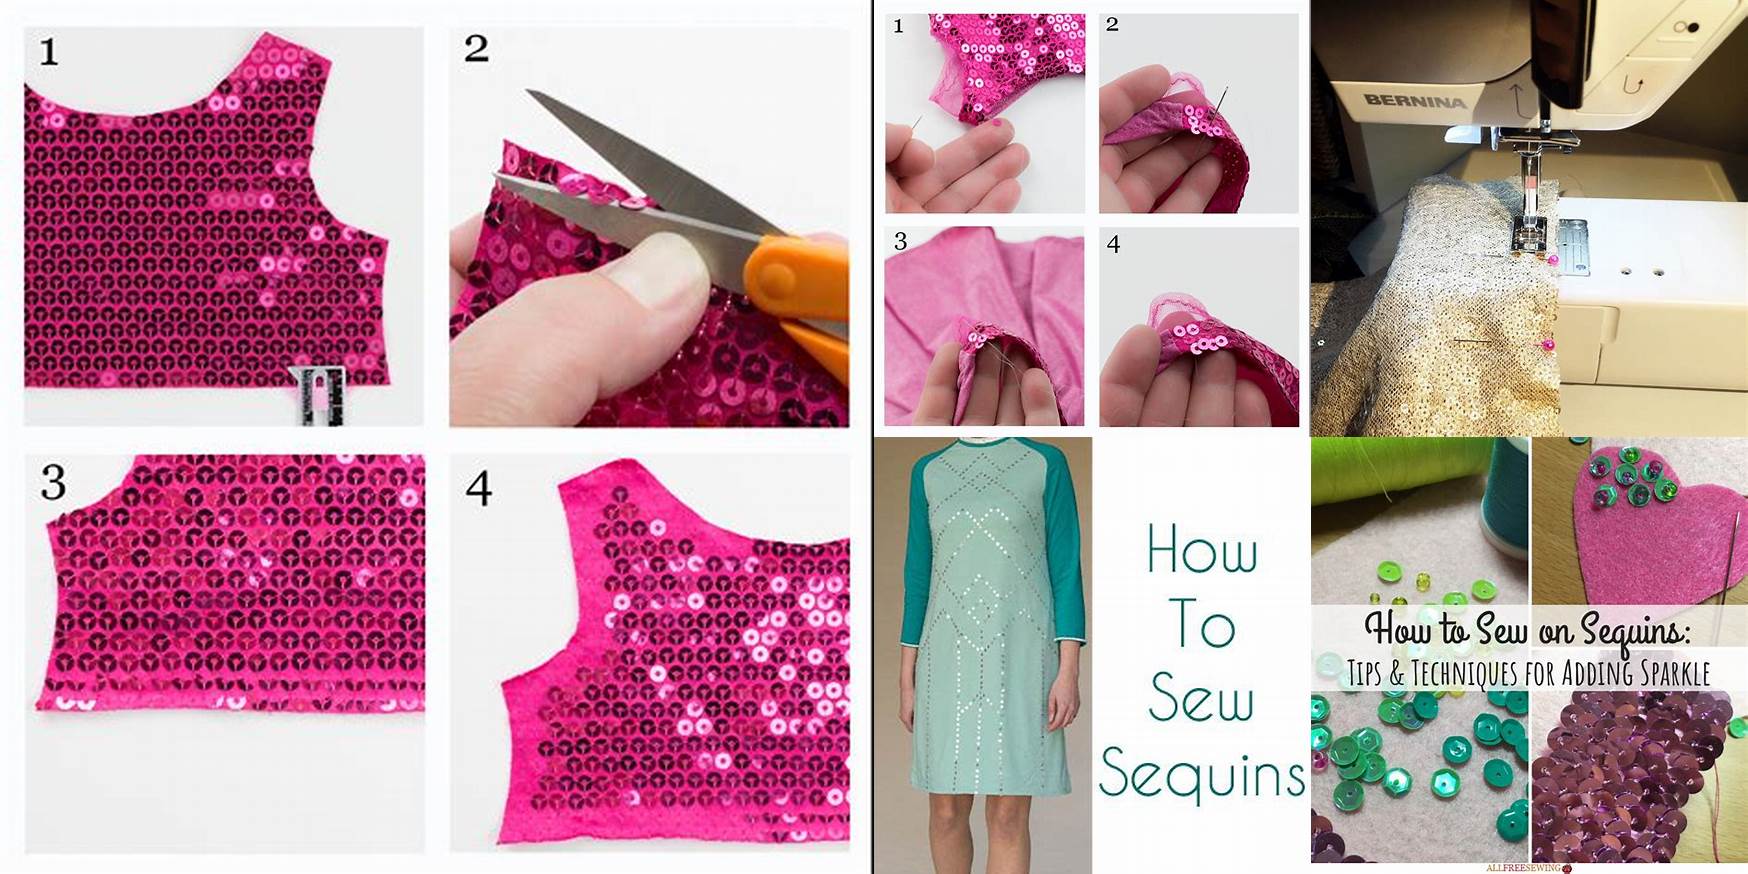 How To Sew Sequins On A Dress